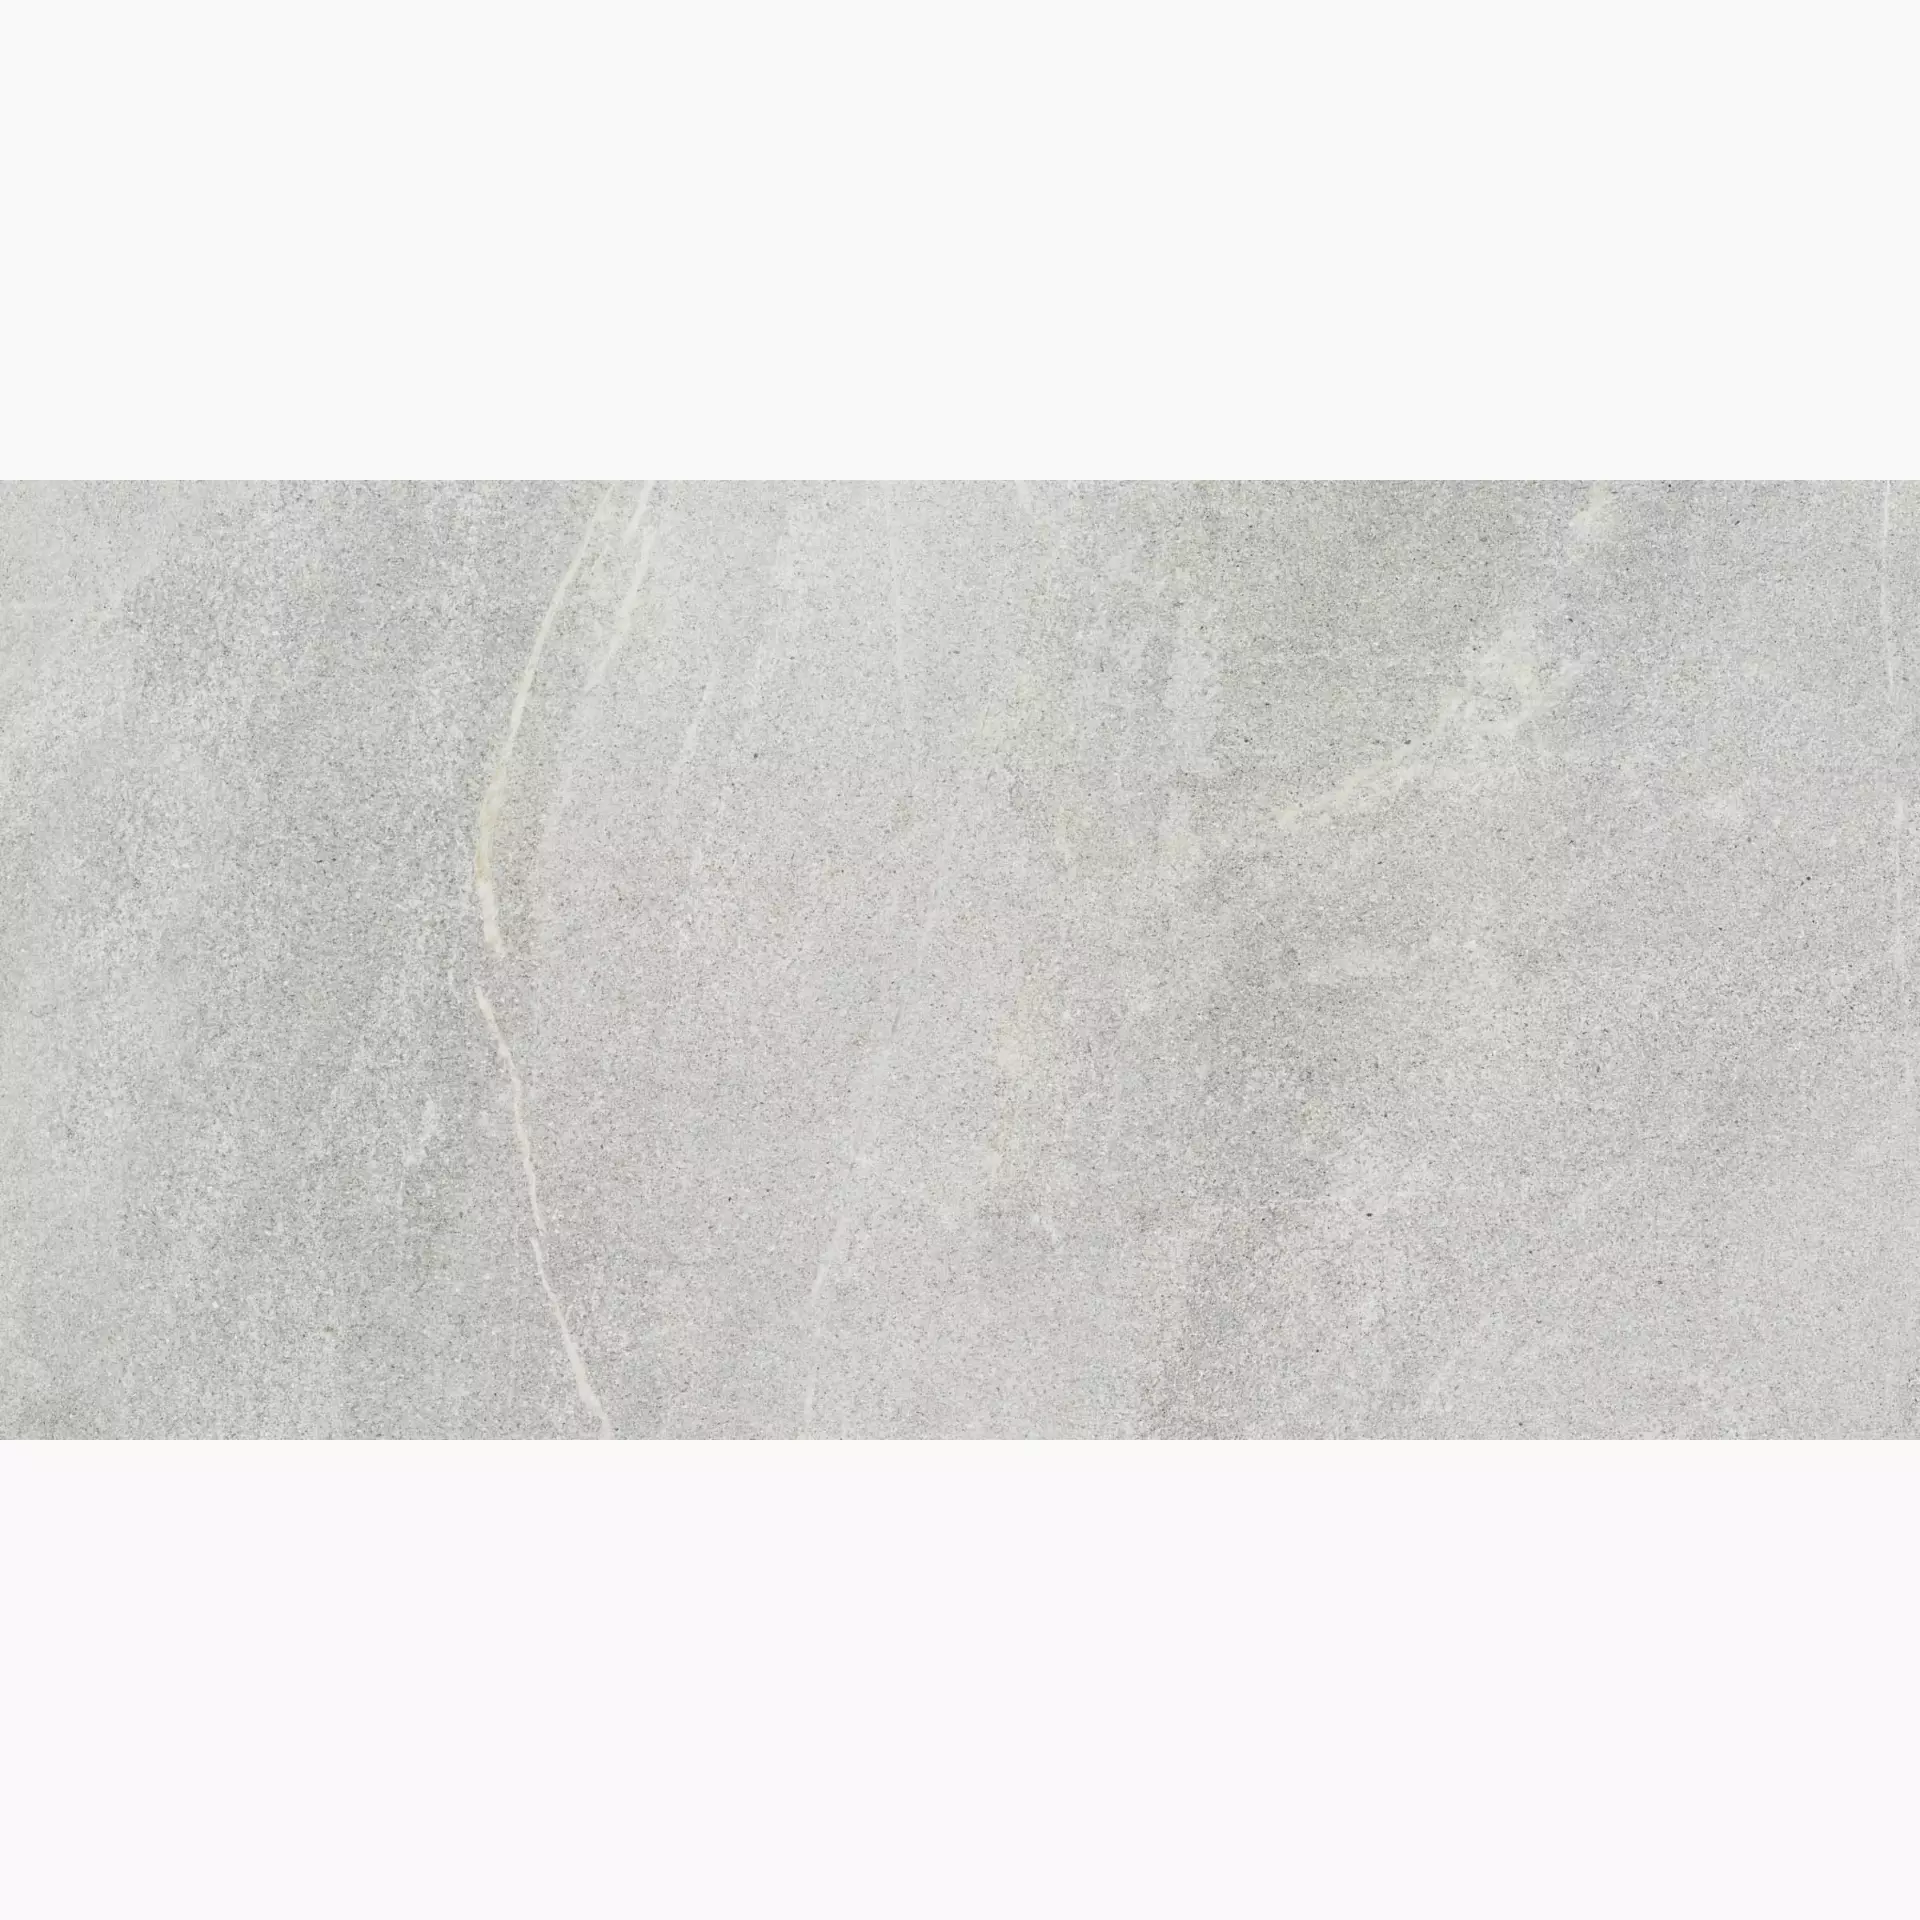 ABK Poetry Stone Piase Ash Naturale PF60010180 60x120cm rectified 8,5mm